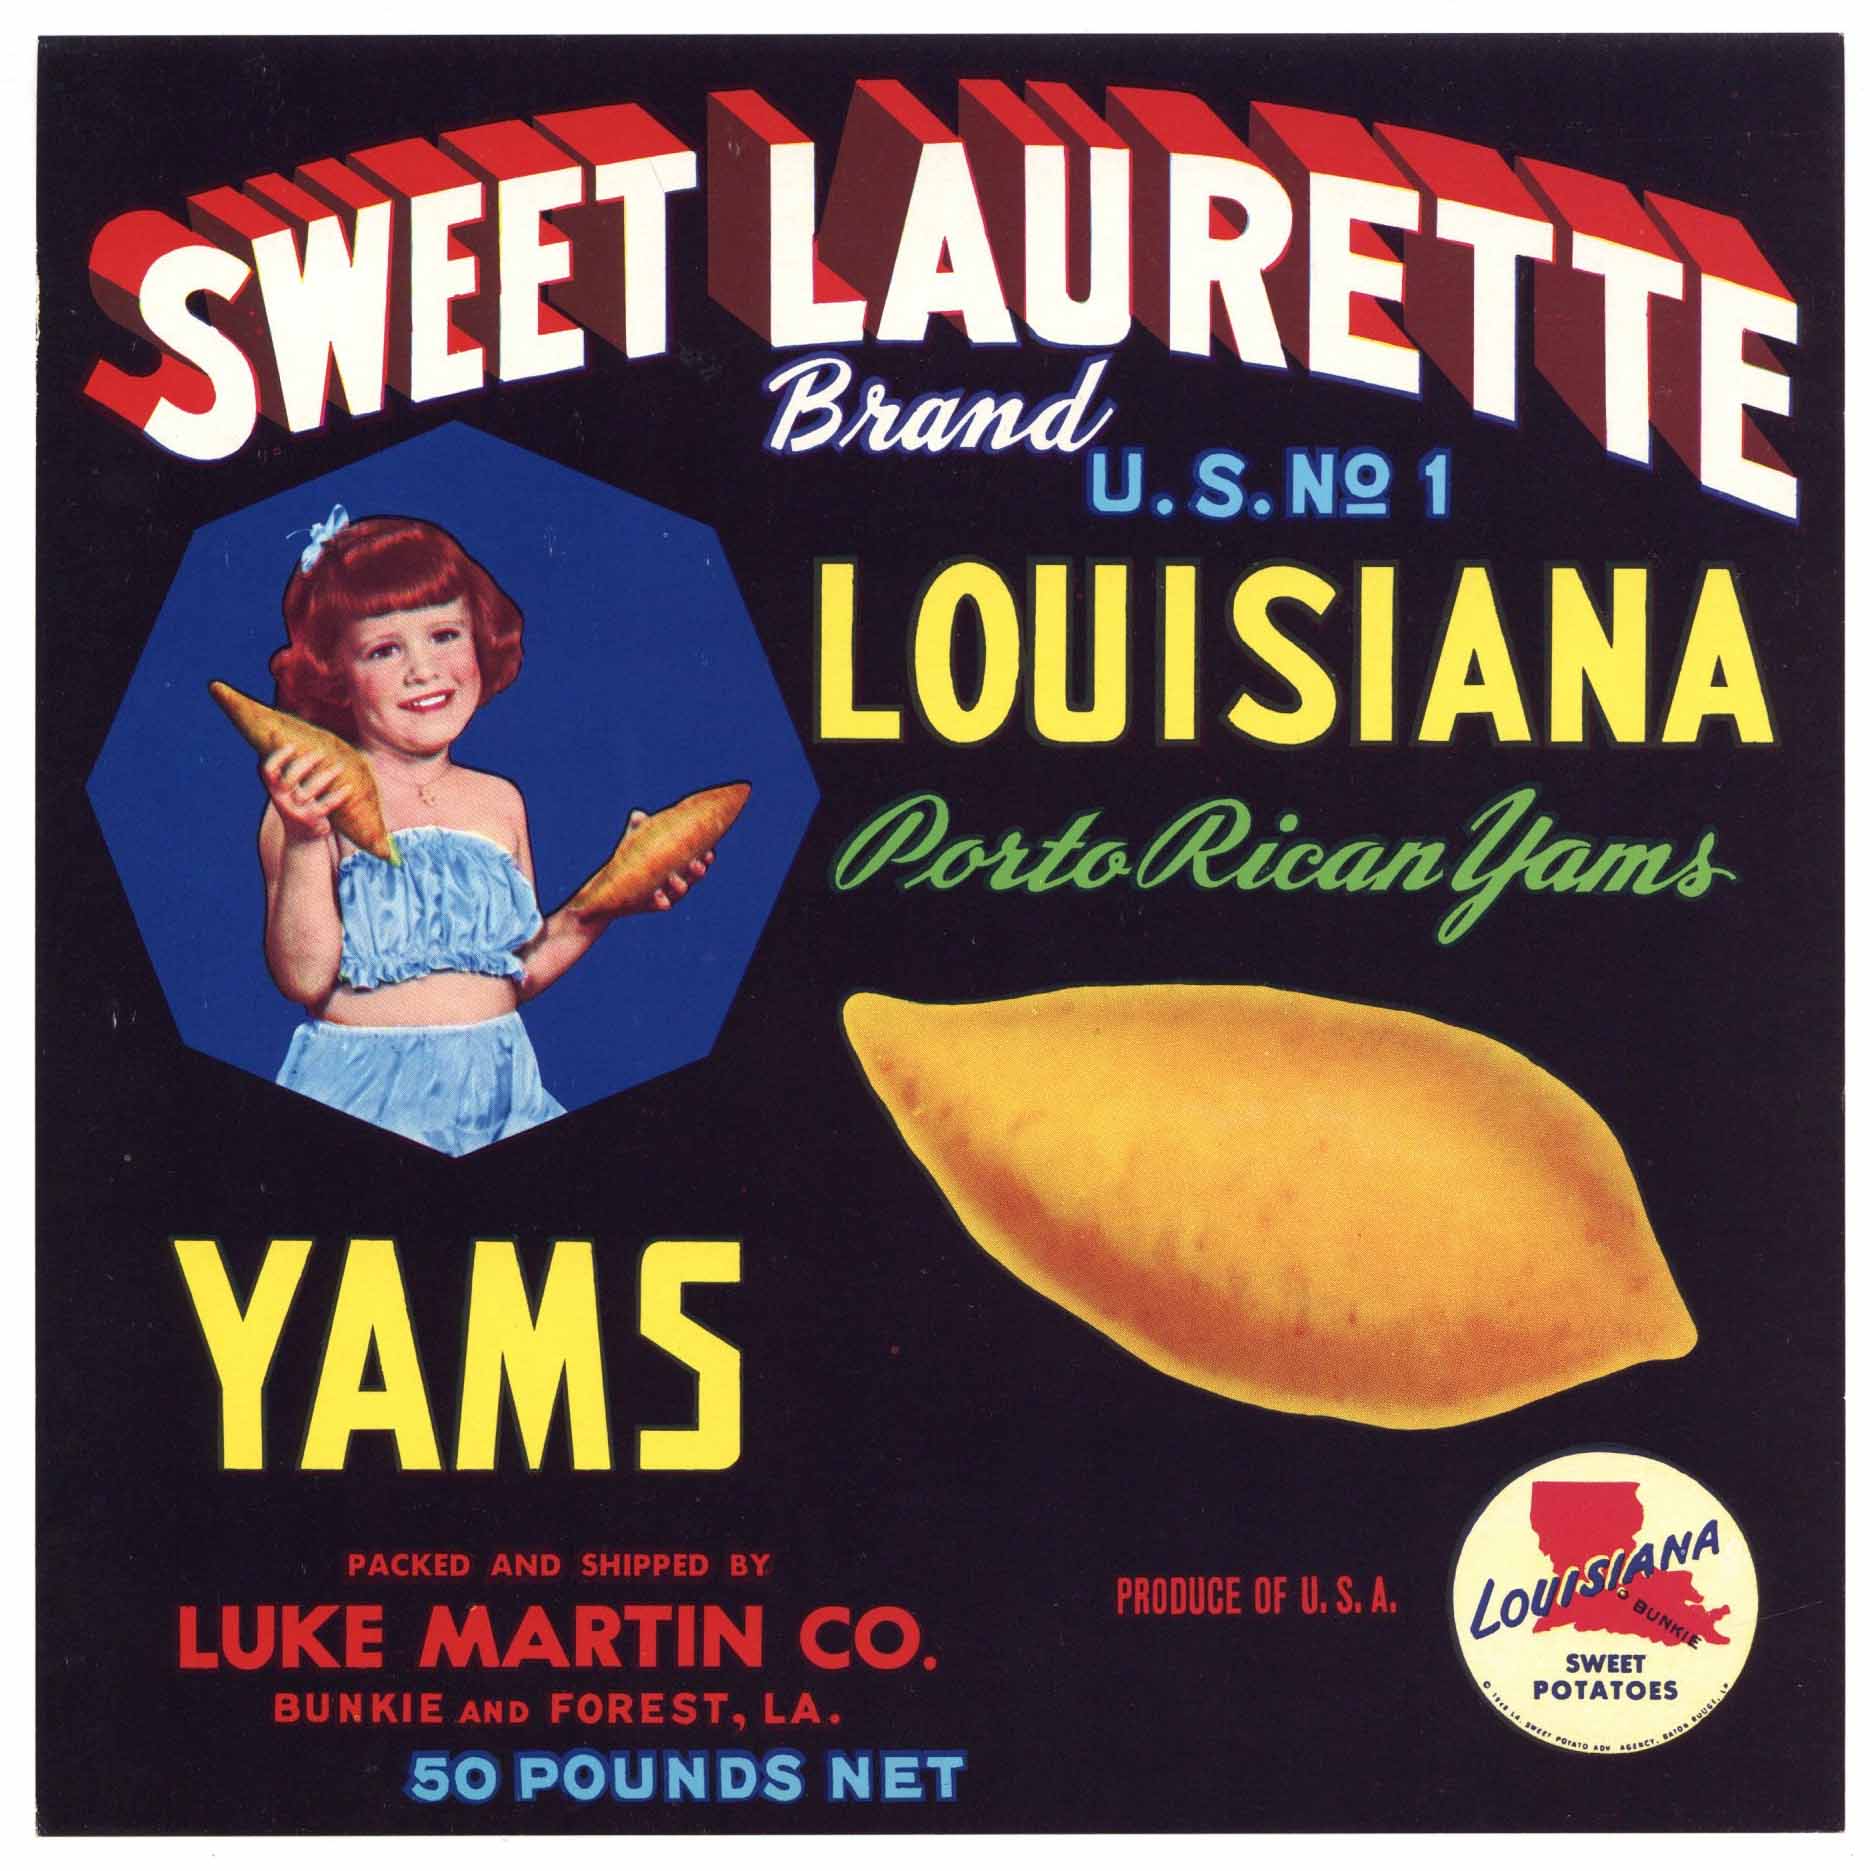 Sweet Laurette Brand Vintage Bunkie Forest Louisiana Yam Crate Label